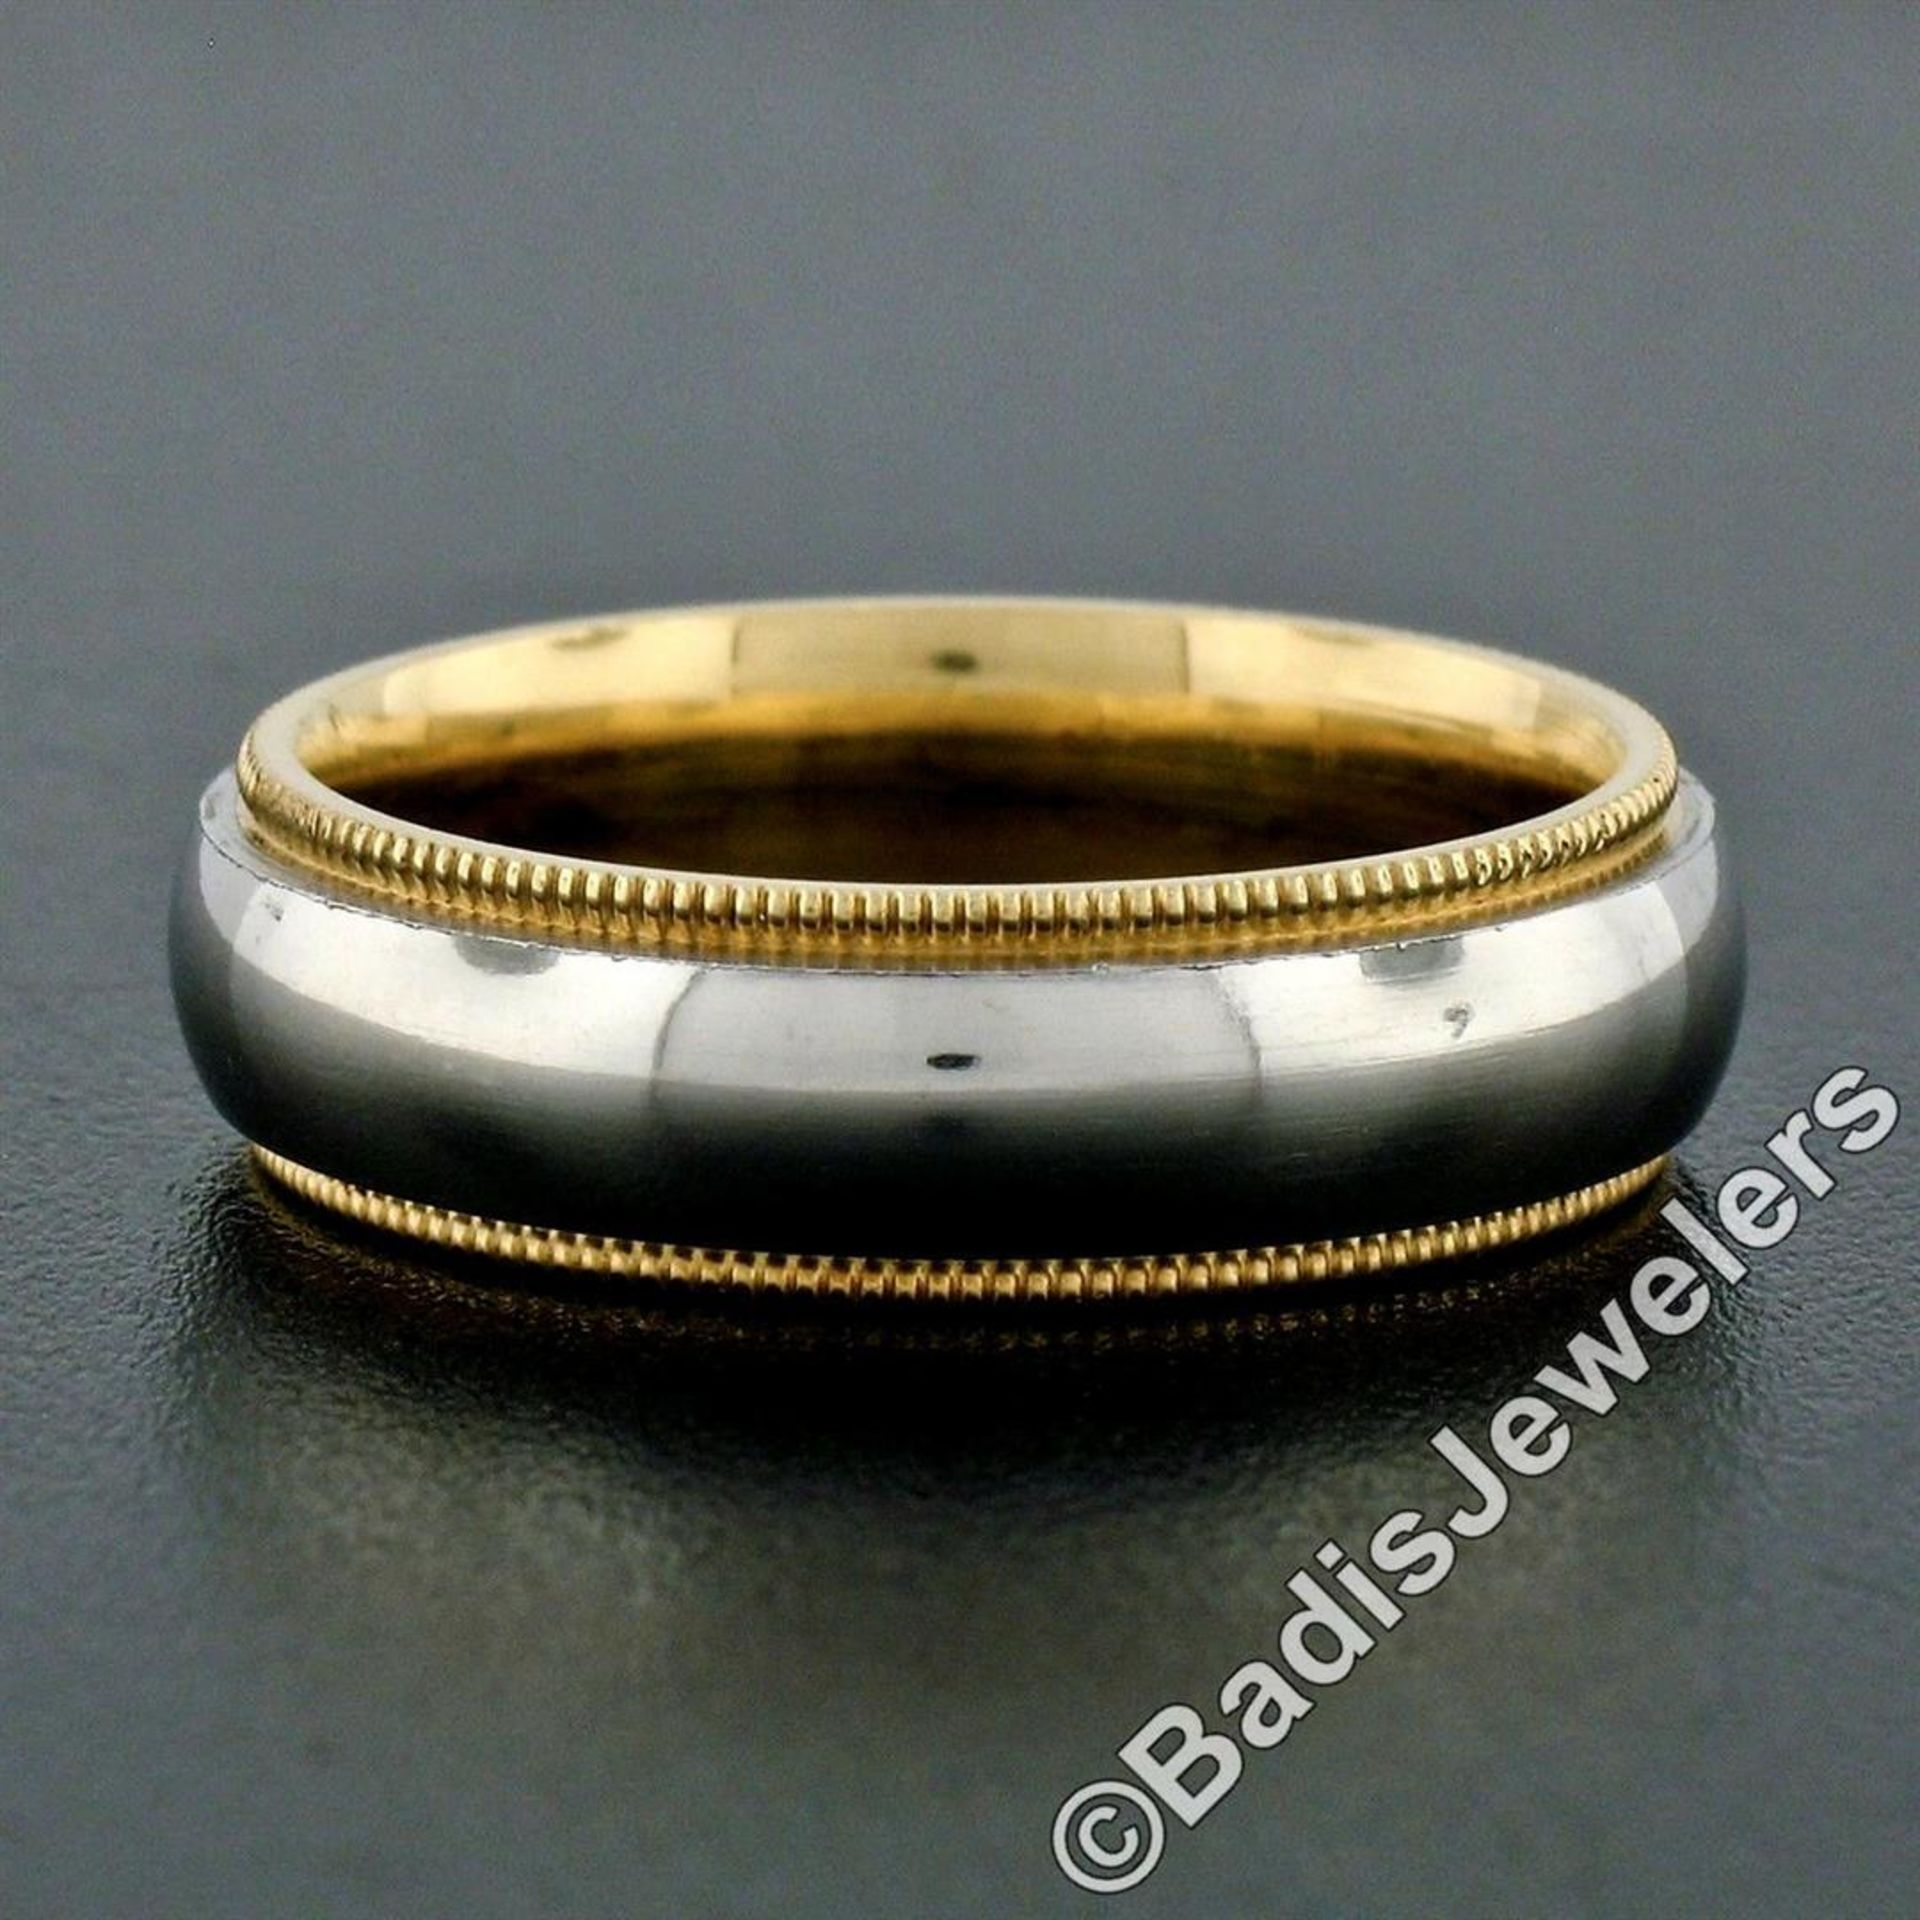 Men's 18kt White and Yellow Gold 5.5mm Milgrain Edged Band Ring - Image 2 of 7